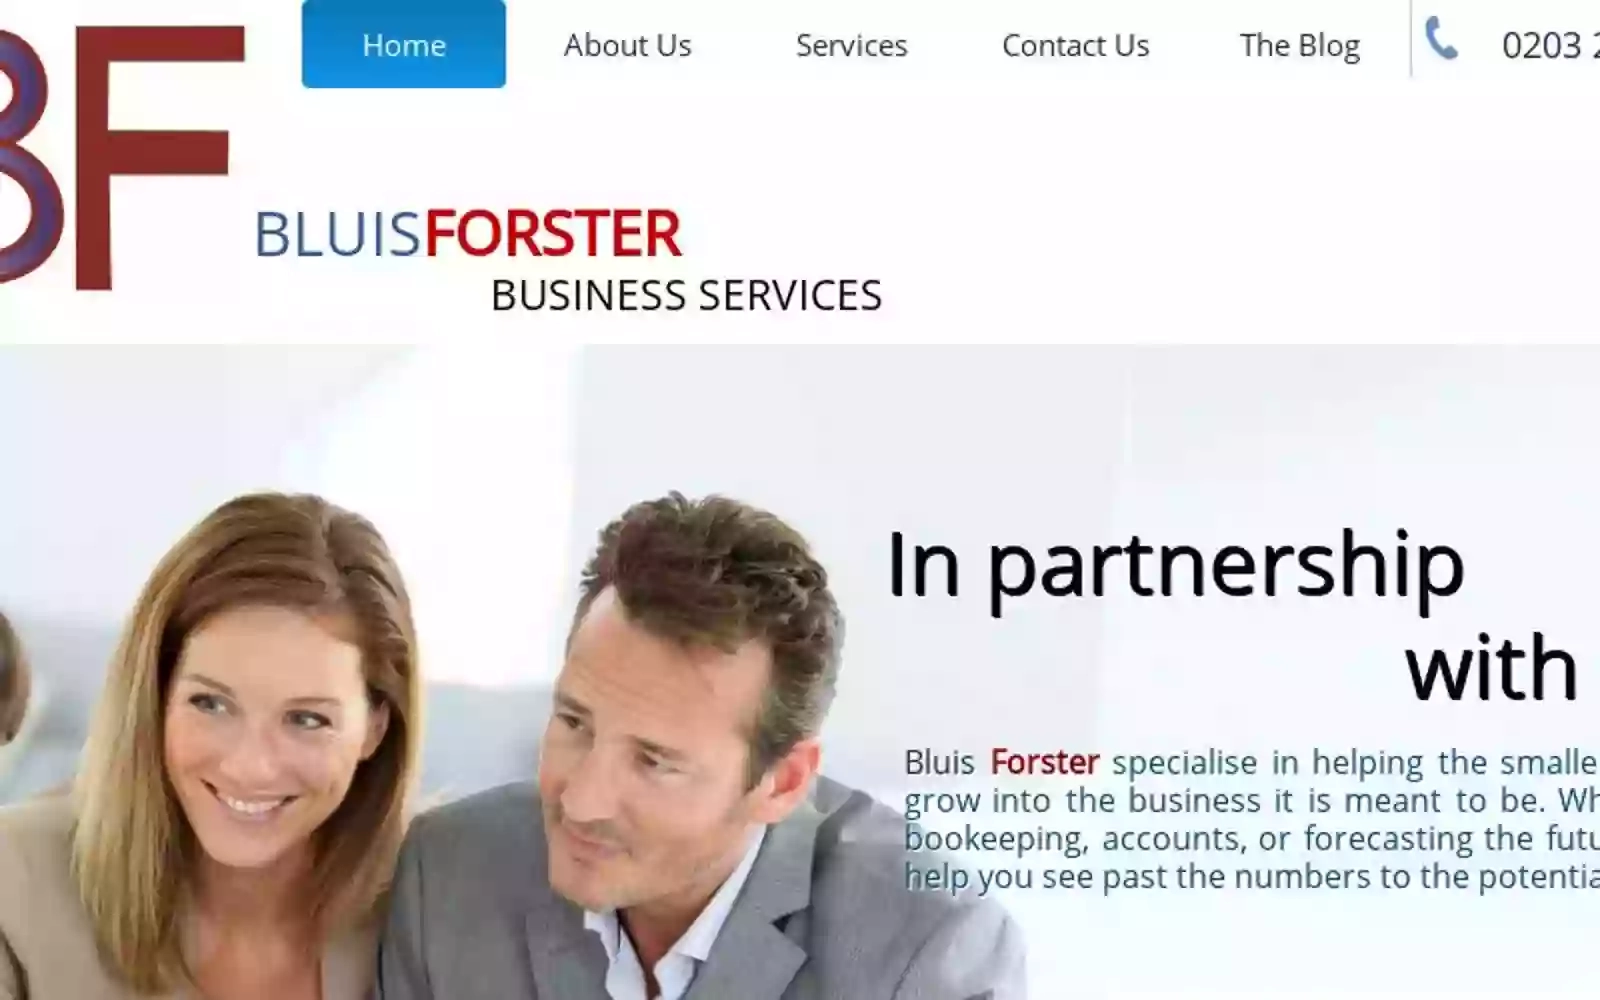 Bluis Forster Business Services